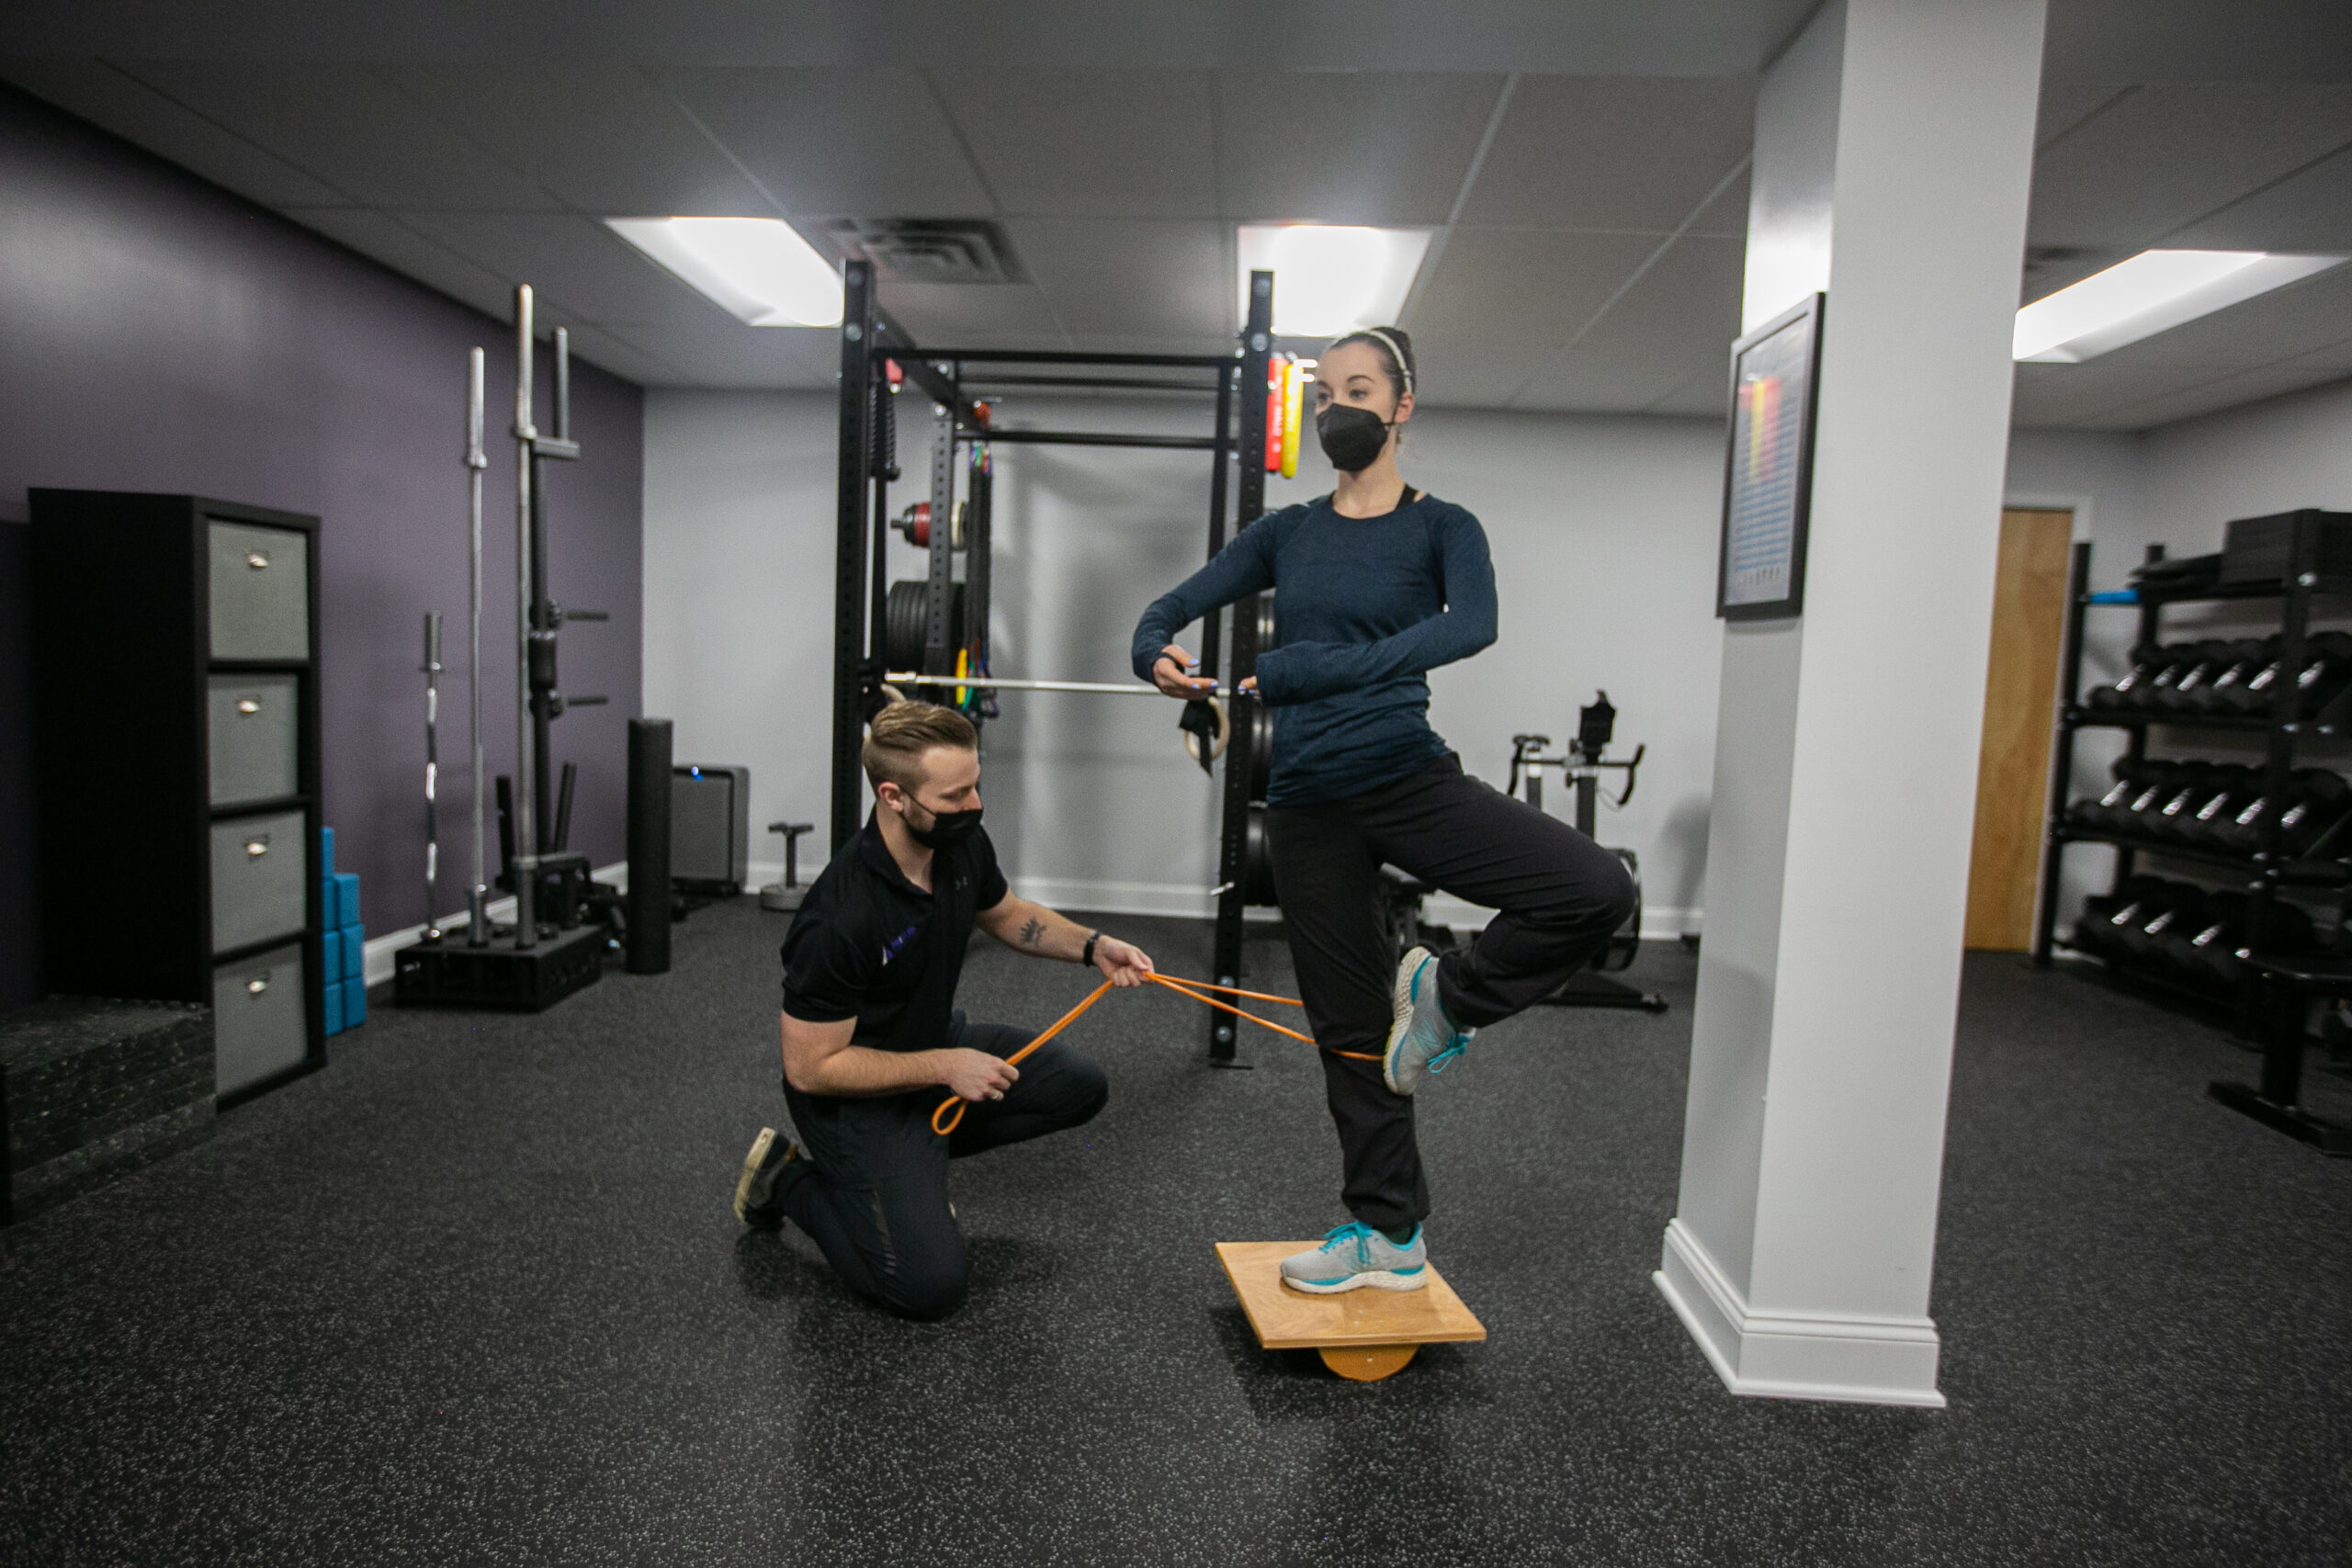 Dr. James working on dance rehabilitation Rochester NY